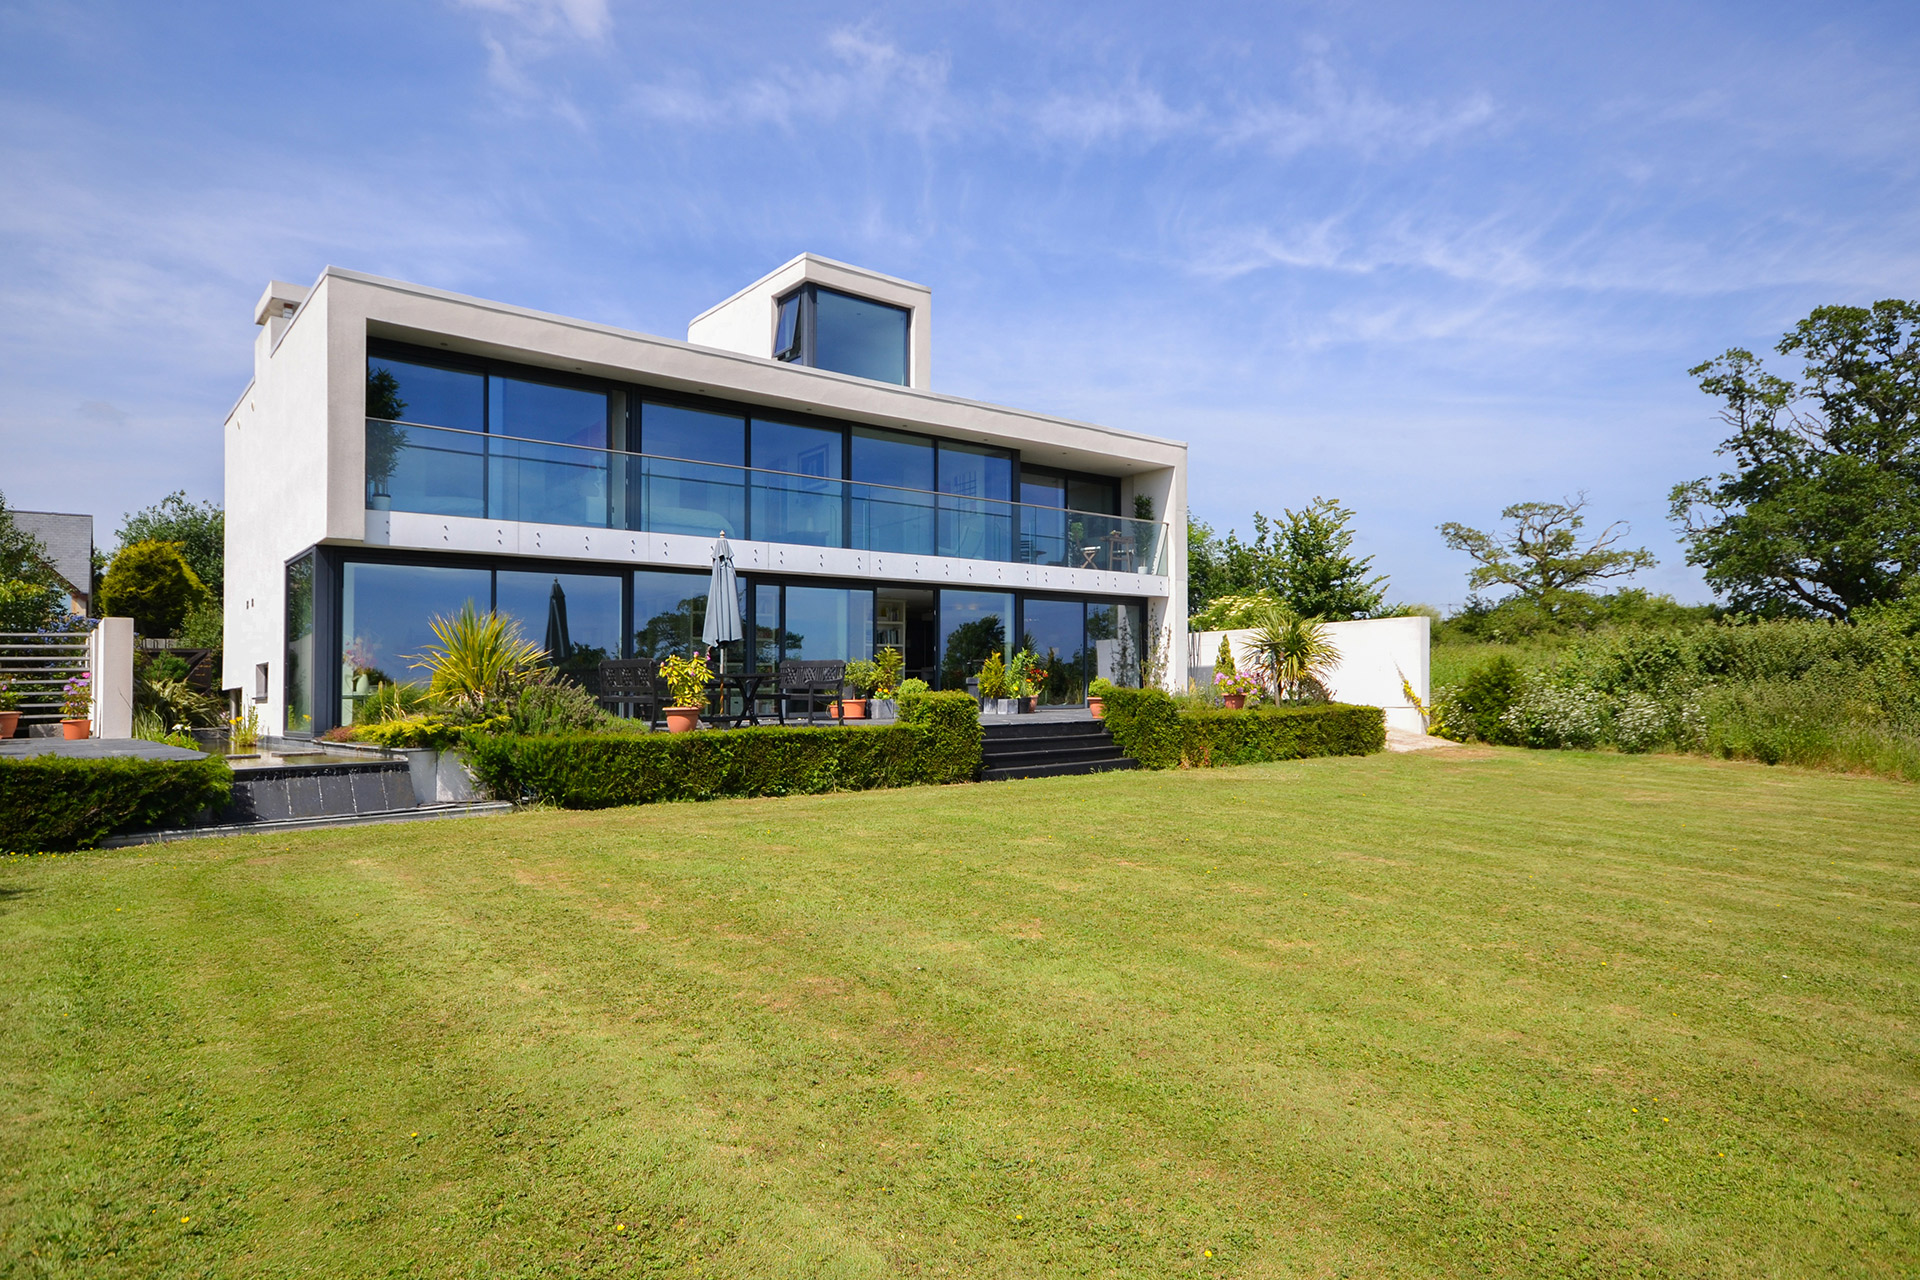 garden view of modern house with large glass frontage